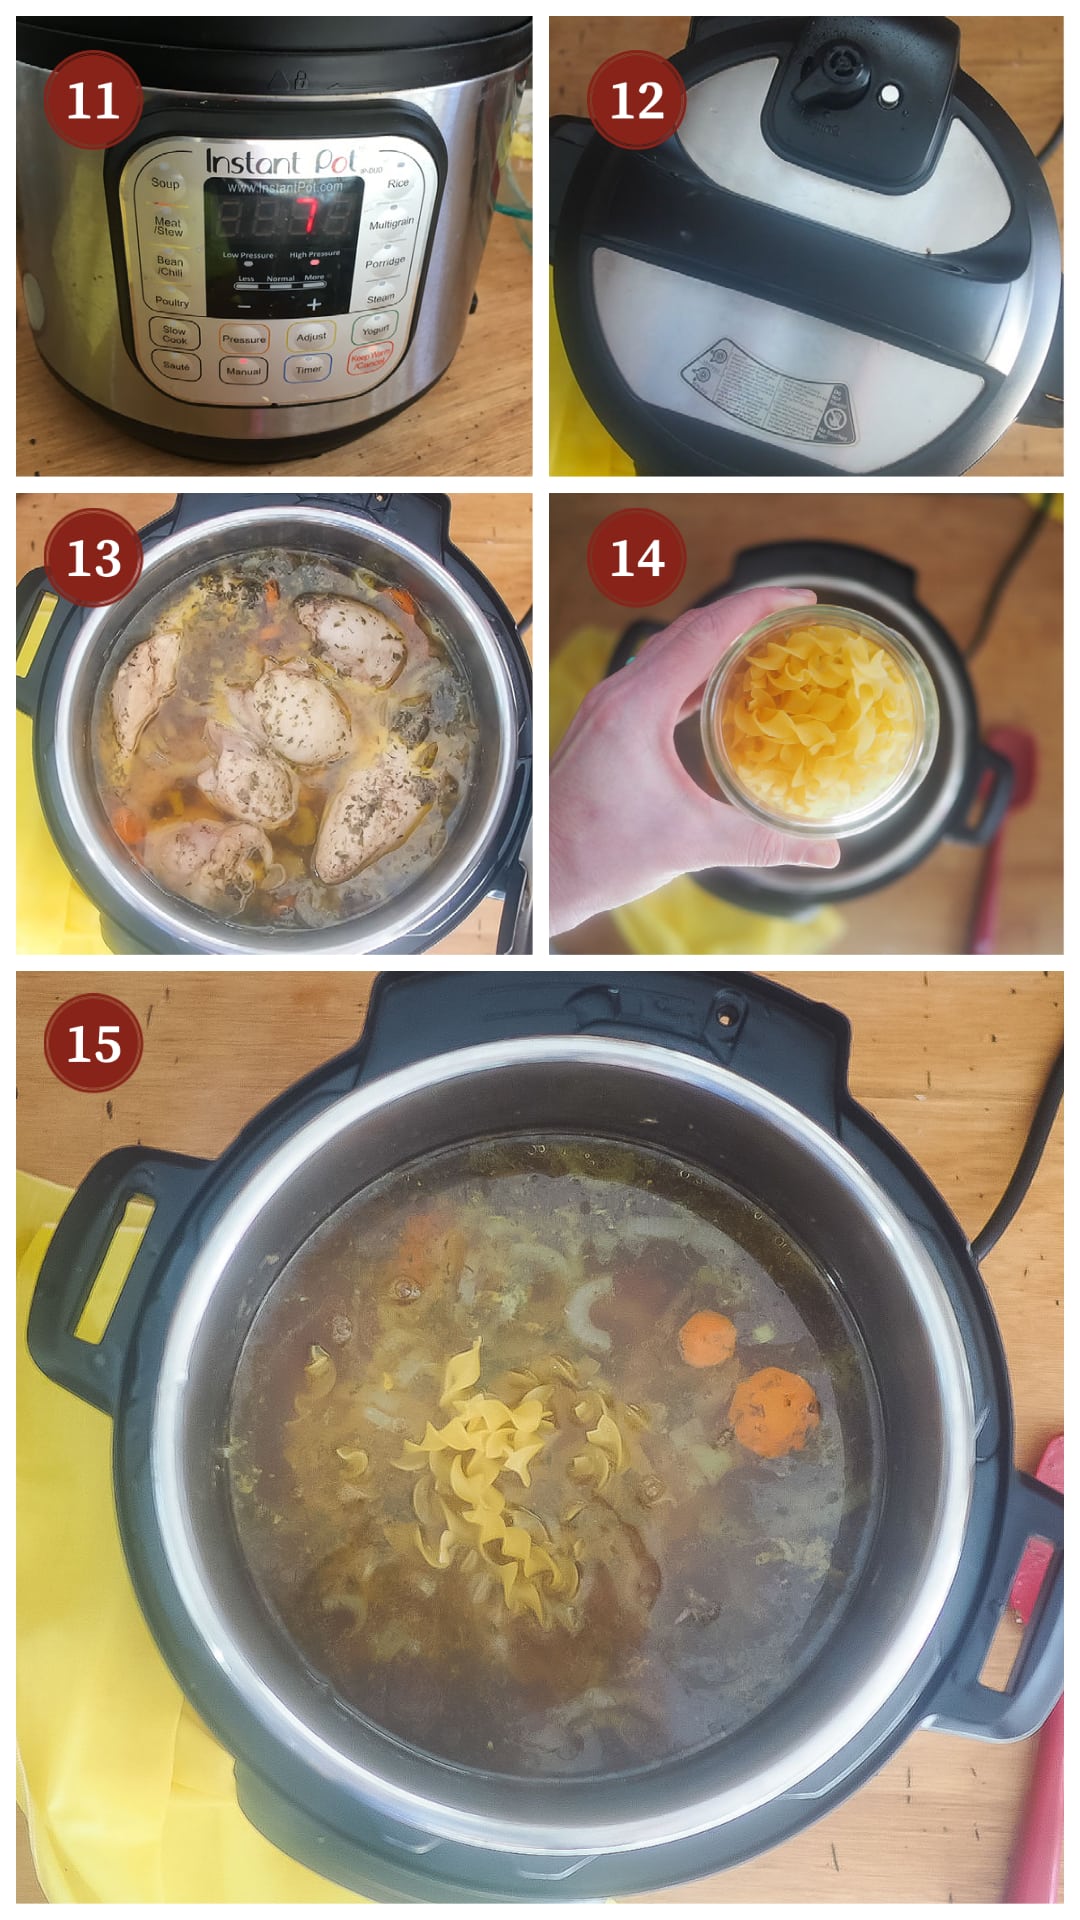 A collage of images showing how to make instant pot chicken noodle soup, steps 11 - 15.